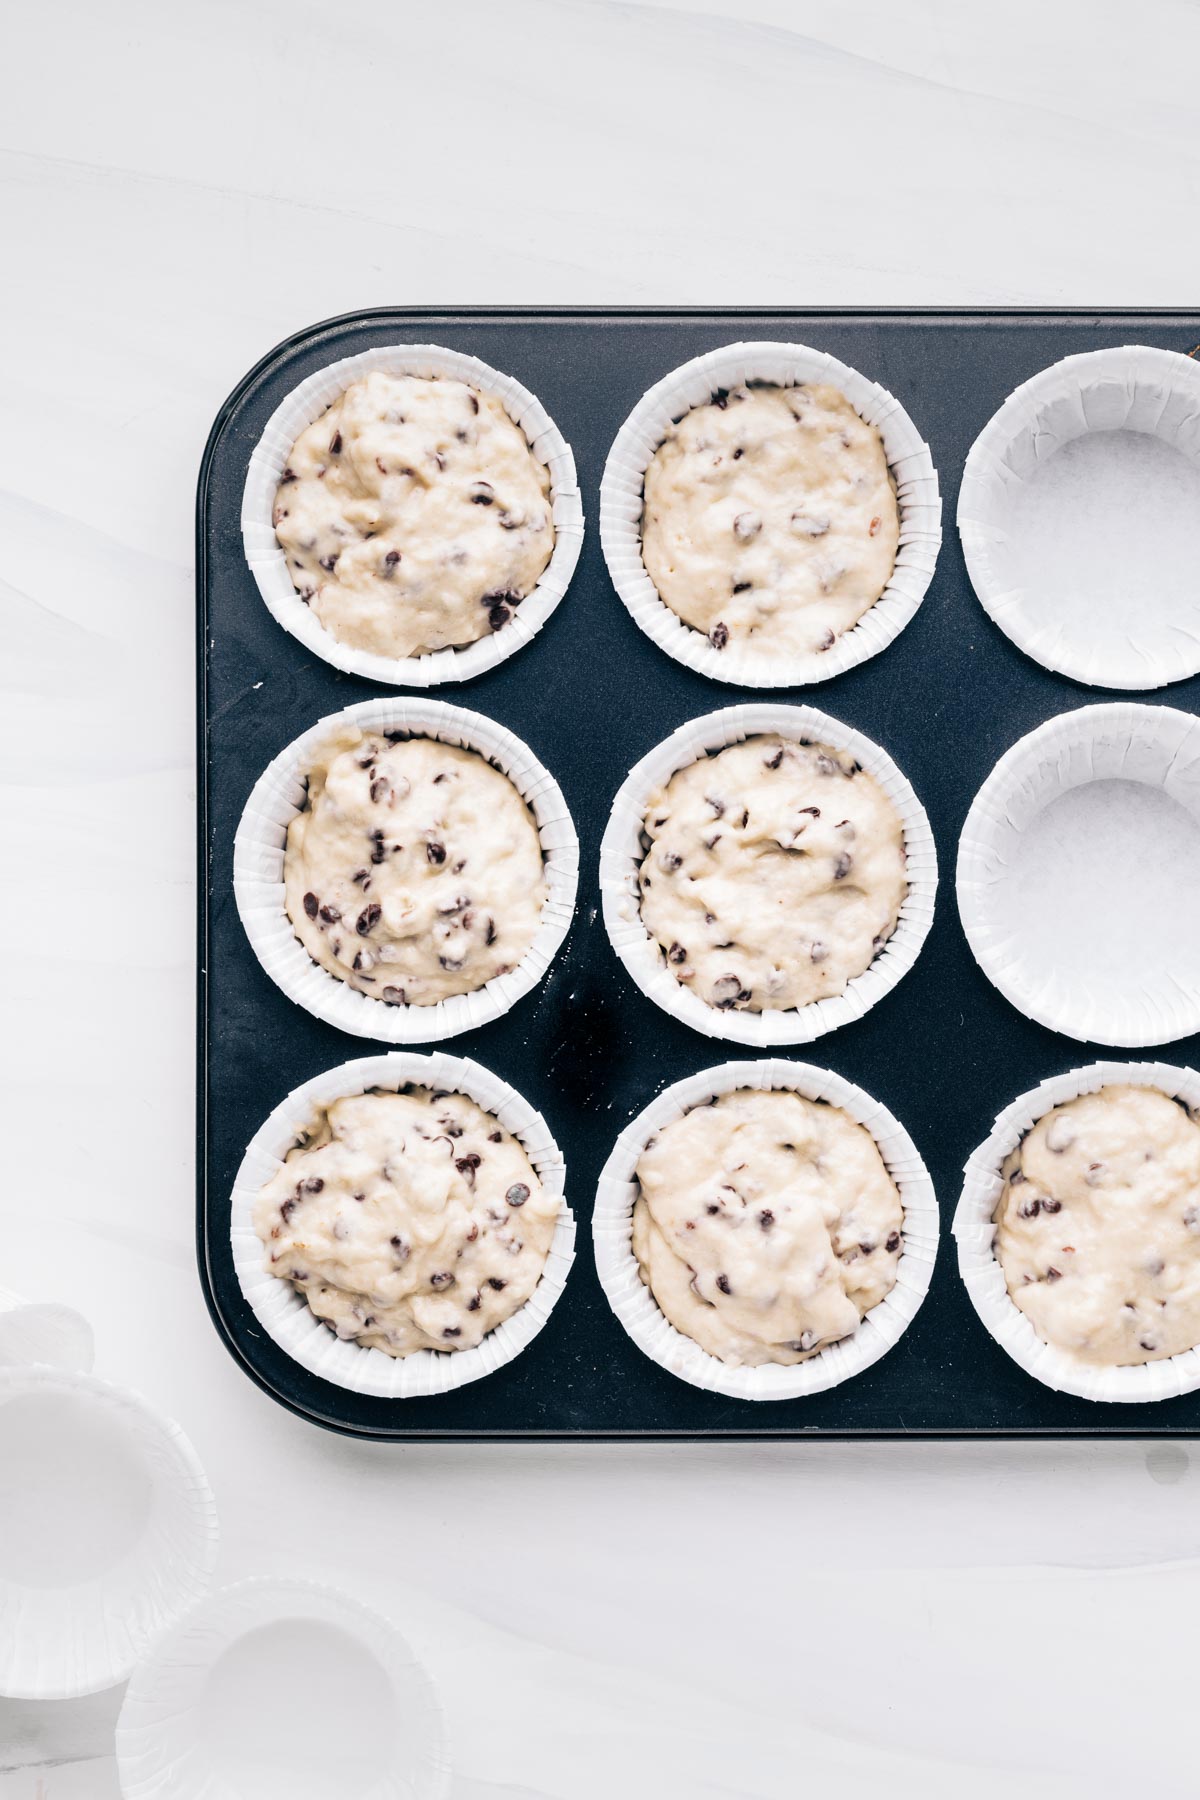 A black muffin tin pan with white cupcake liners and chocolate chip muffins batter in it